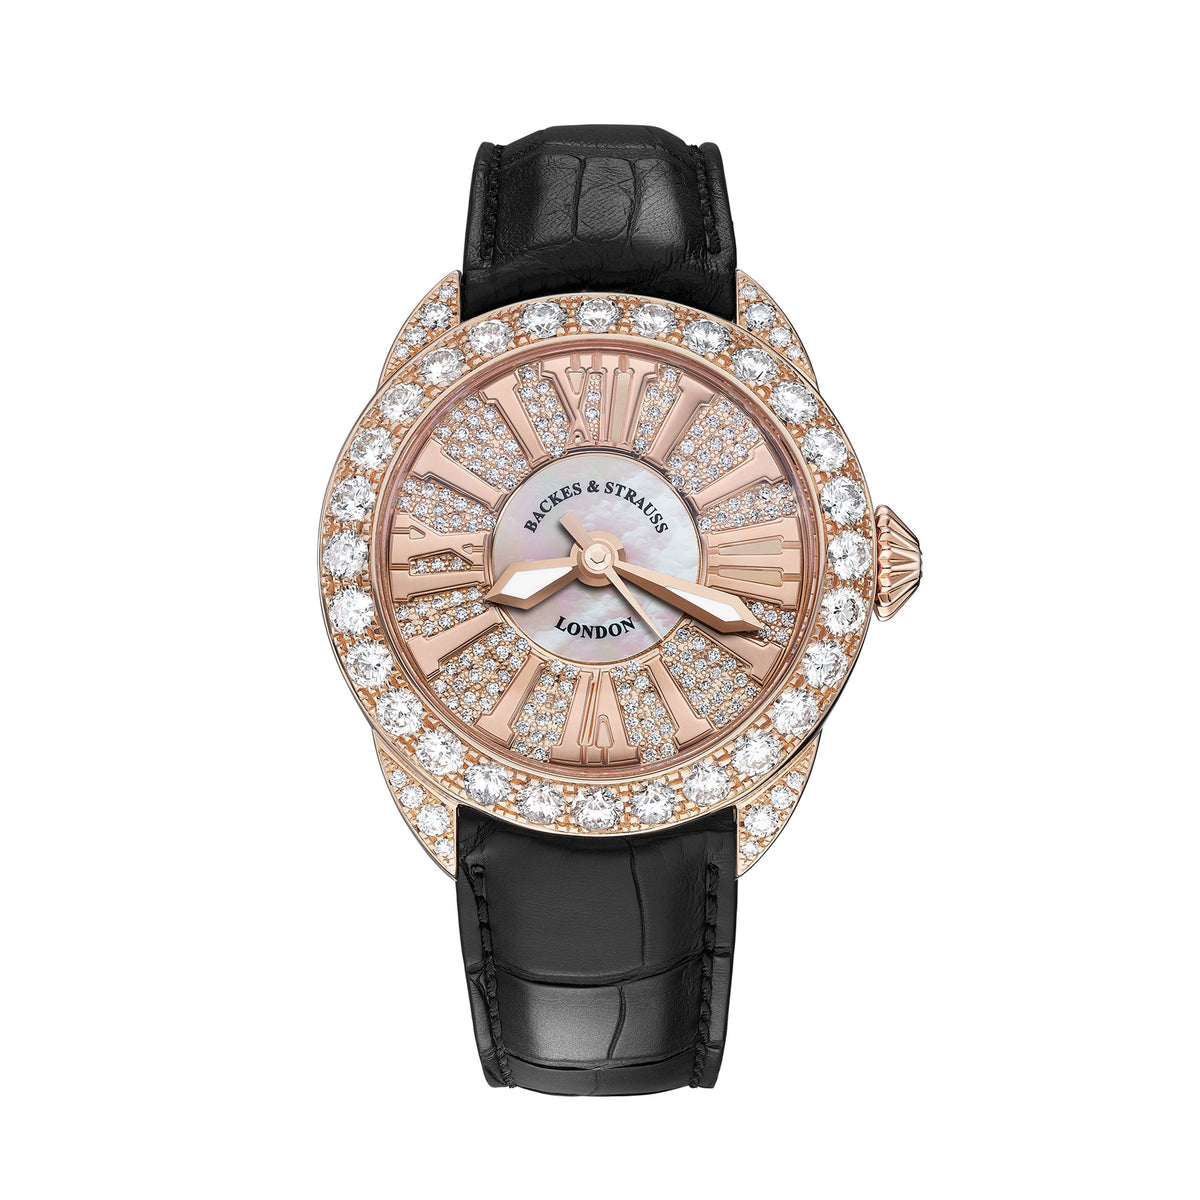 Piccadilly 37 Luxury Diamond Watch for Women - 37 mm Rose Gold - Backes & Strauss